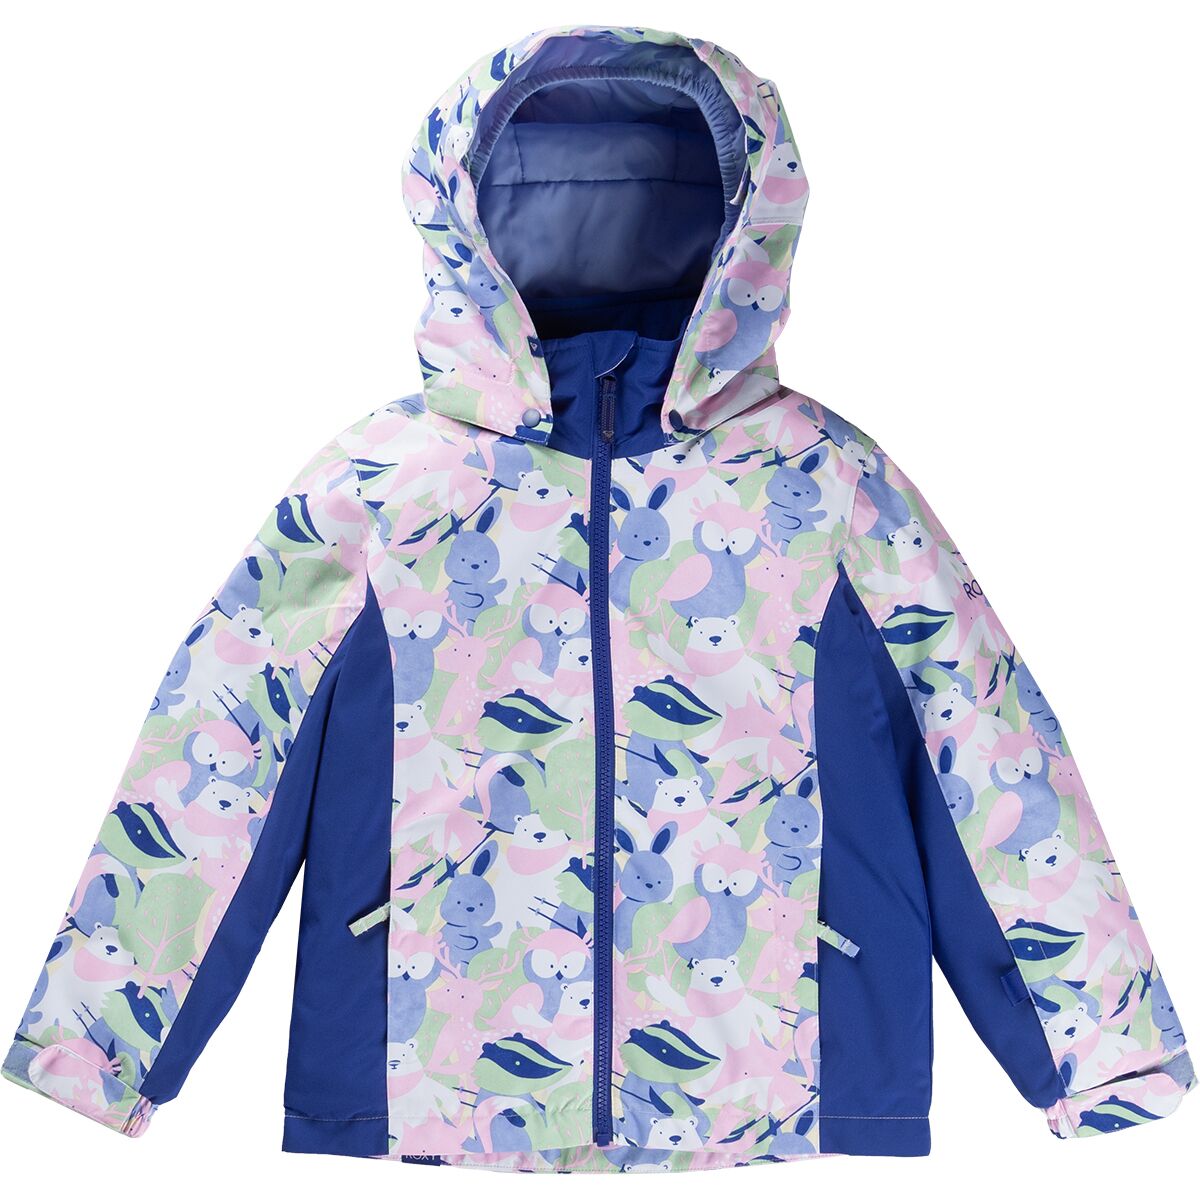 Roxy Snowy Tale Jacket - Toddler Girls' Bright White Mountains Locals